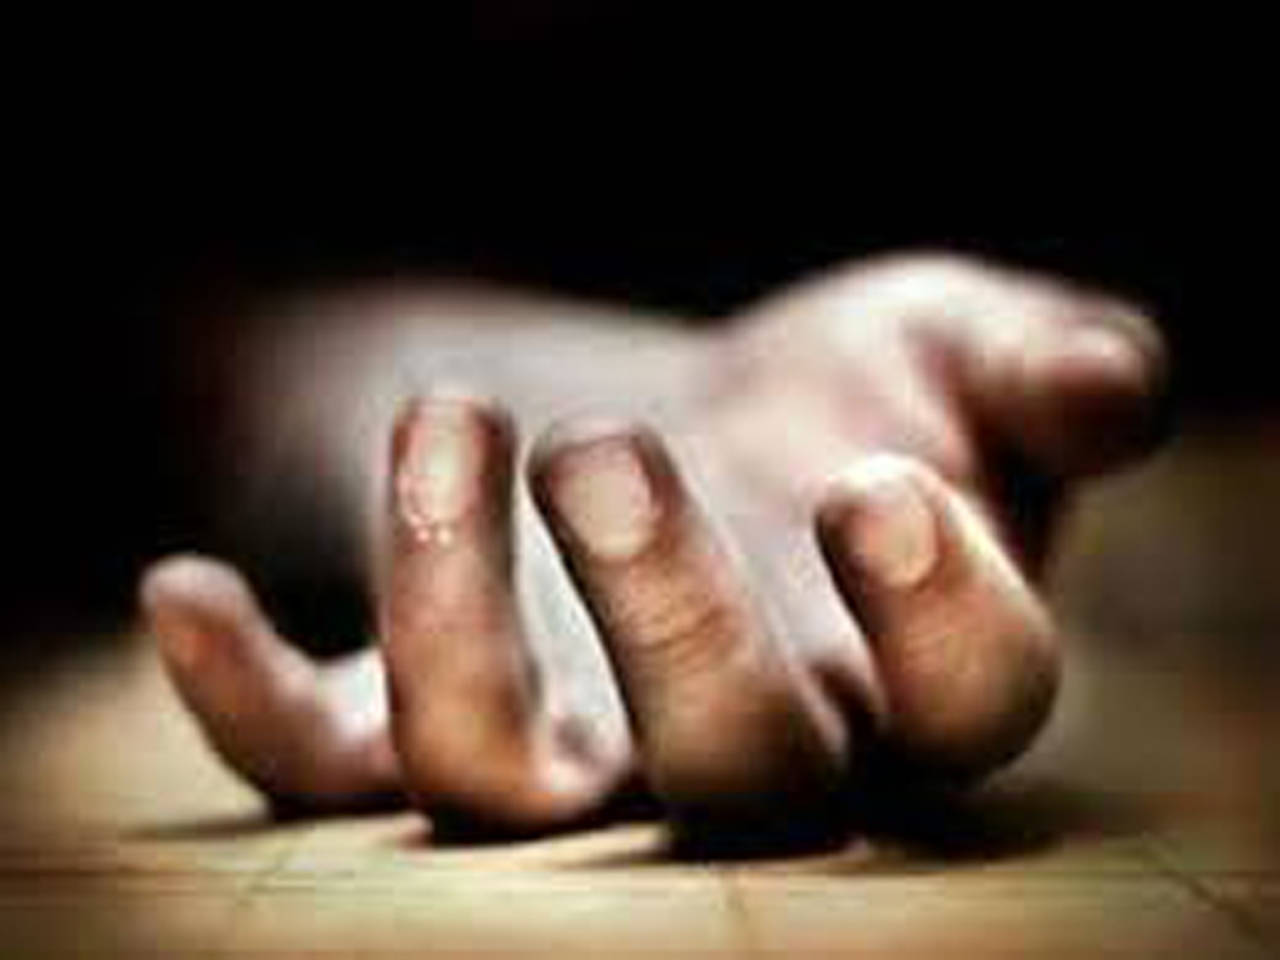 Govt employee commits suicide, kin allege torture by higher-ups ...